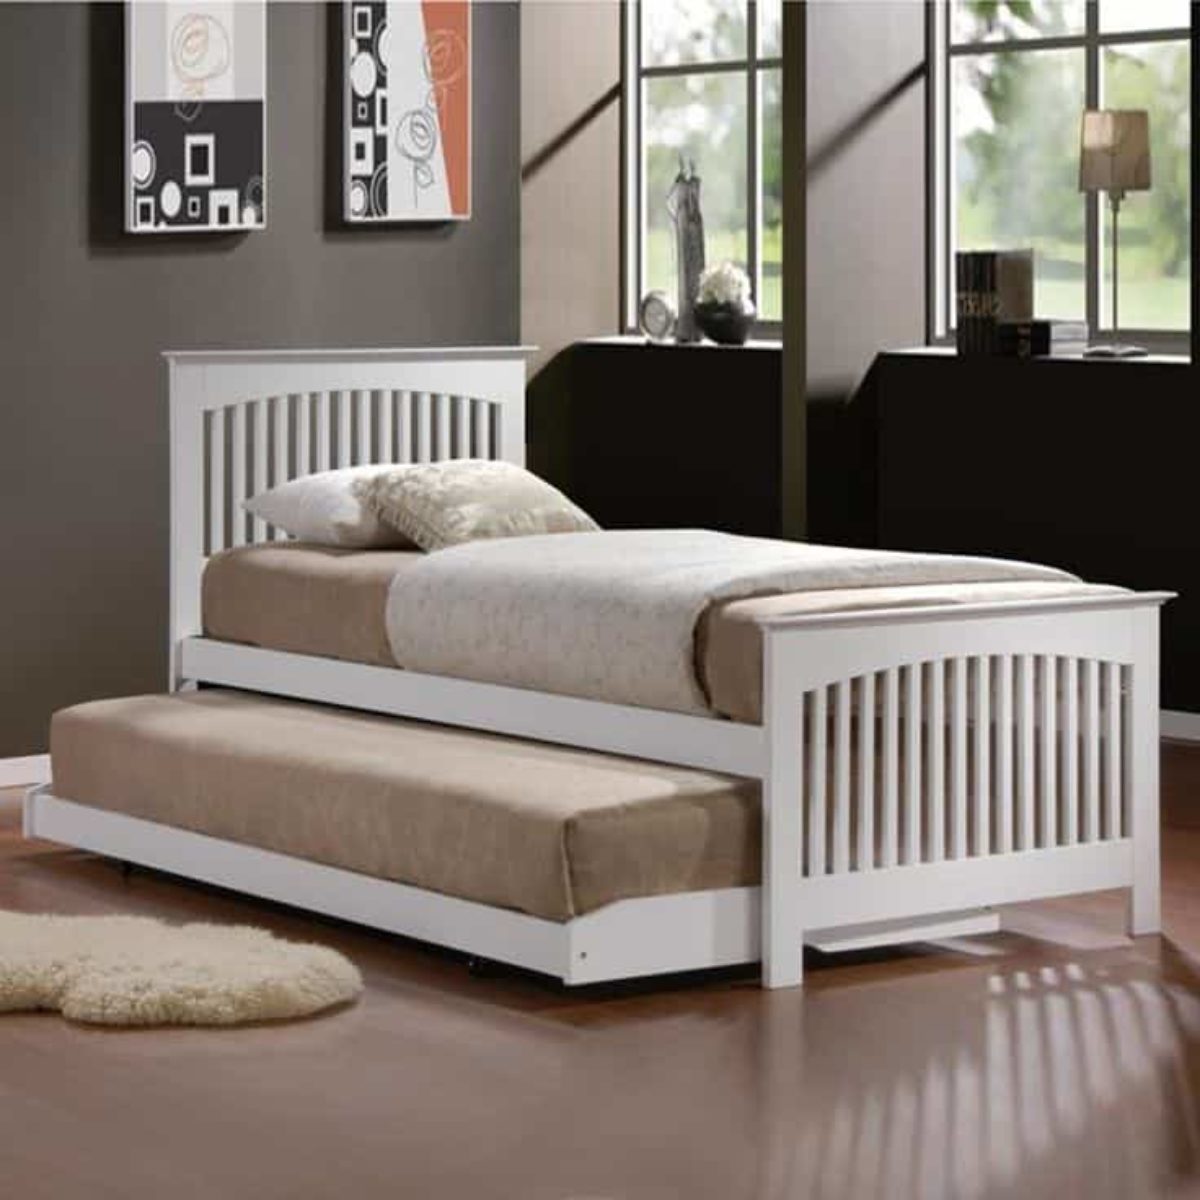 childrens beds with pull out bed underneath